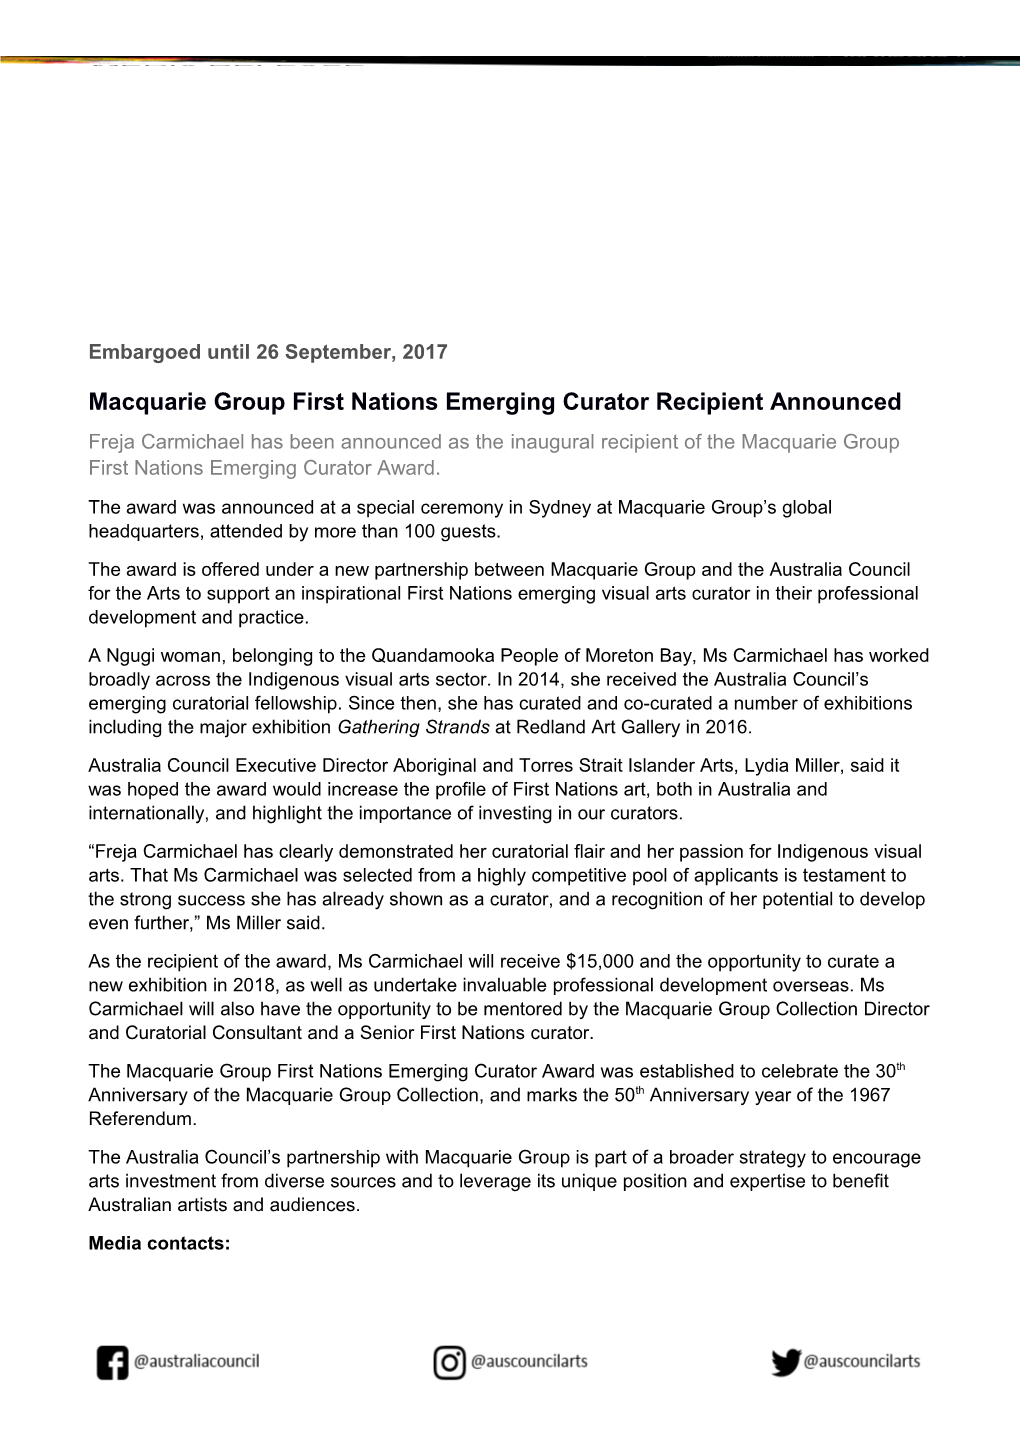 Macquarie Group First Nations Emerging Curator Recipient Announced